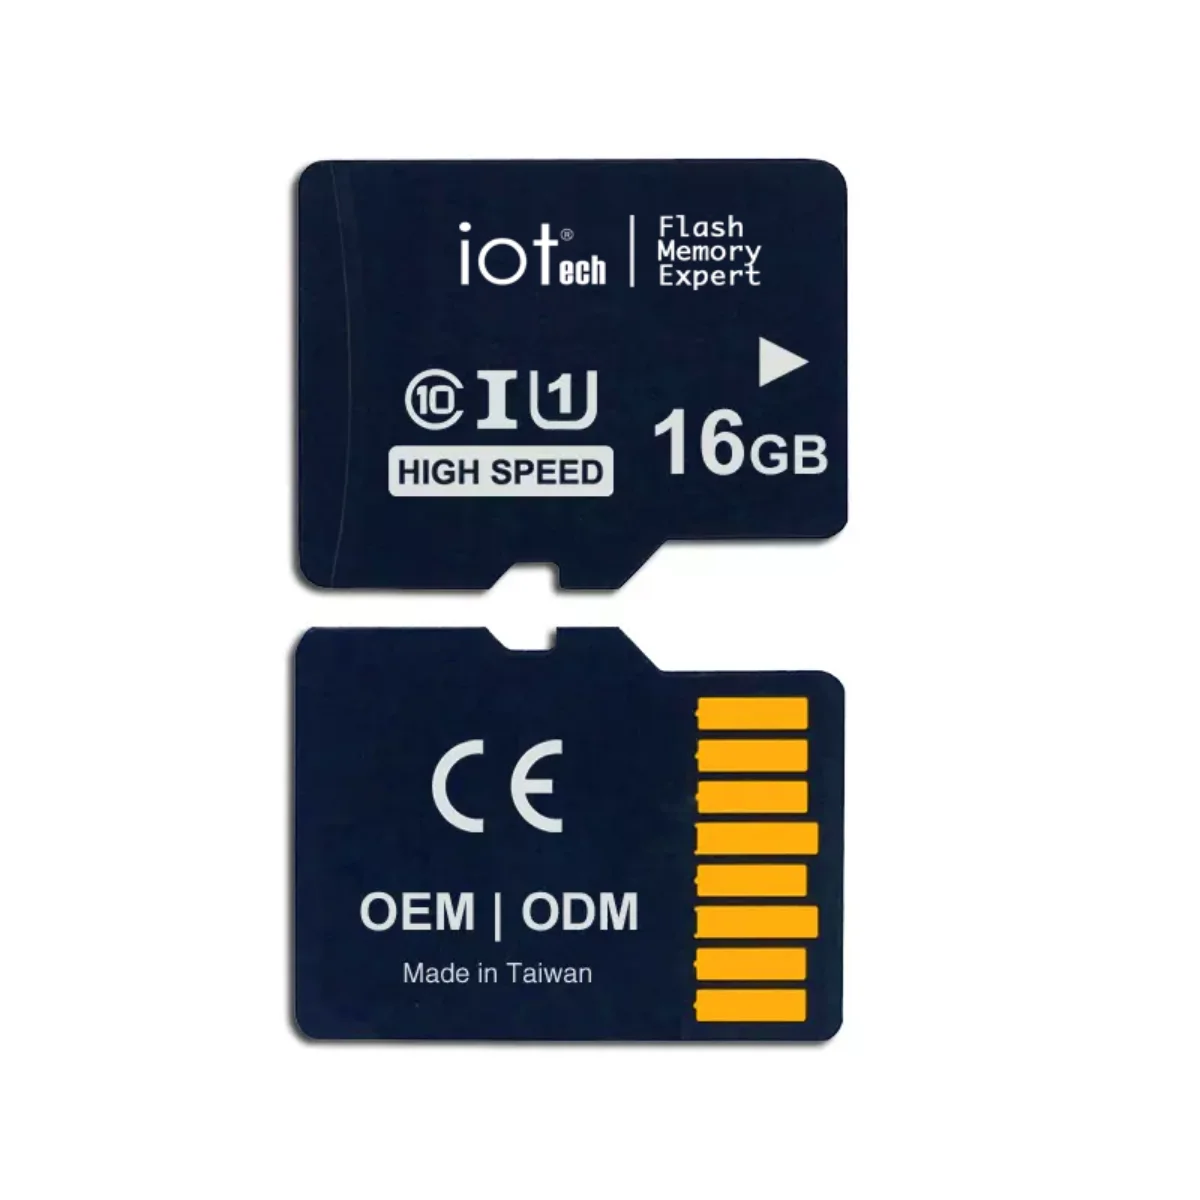 censuur Schepsel Welke Goede Kwaliteit Nano Sd Micro Geheugenkaart 128mb 512mb - Buy 512mb 1gb 2gb  Sd Micro Geheugenkaart,512mb Bulk Sd-kaart,Sd Micro 2gb Kaart Product on  Alibaba.com